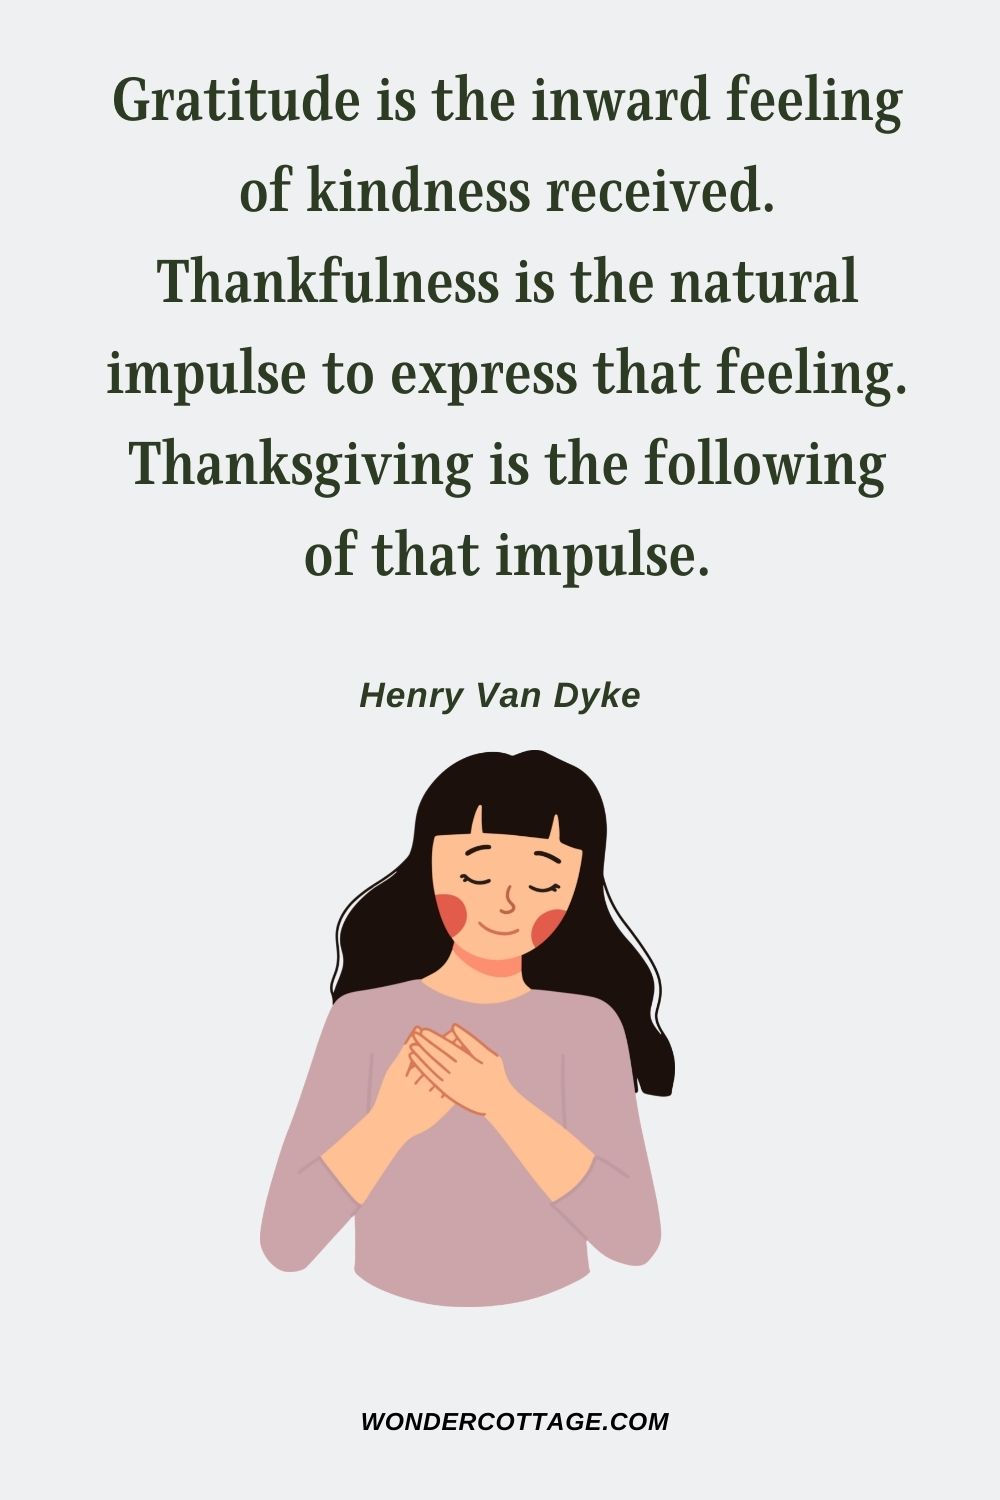 Gratitude is the inward feeling of kindness received. Thankfulness is the natural impulse to express that feeling. Thanksgiving is the following of that impulse. Henry Van Dyke